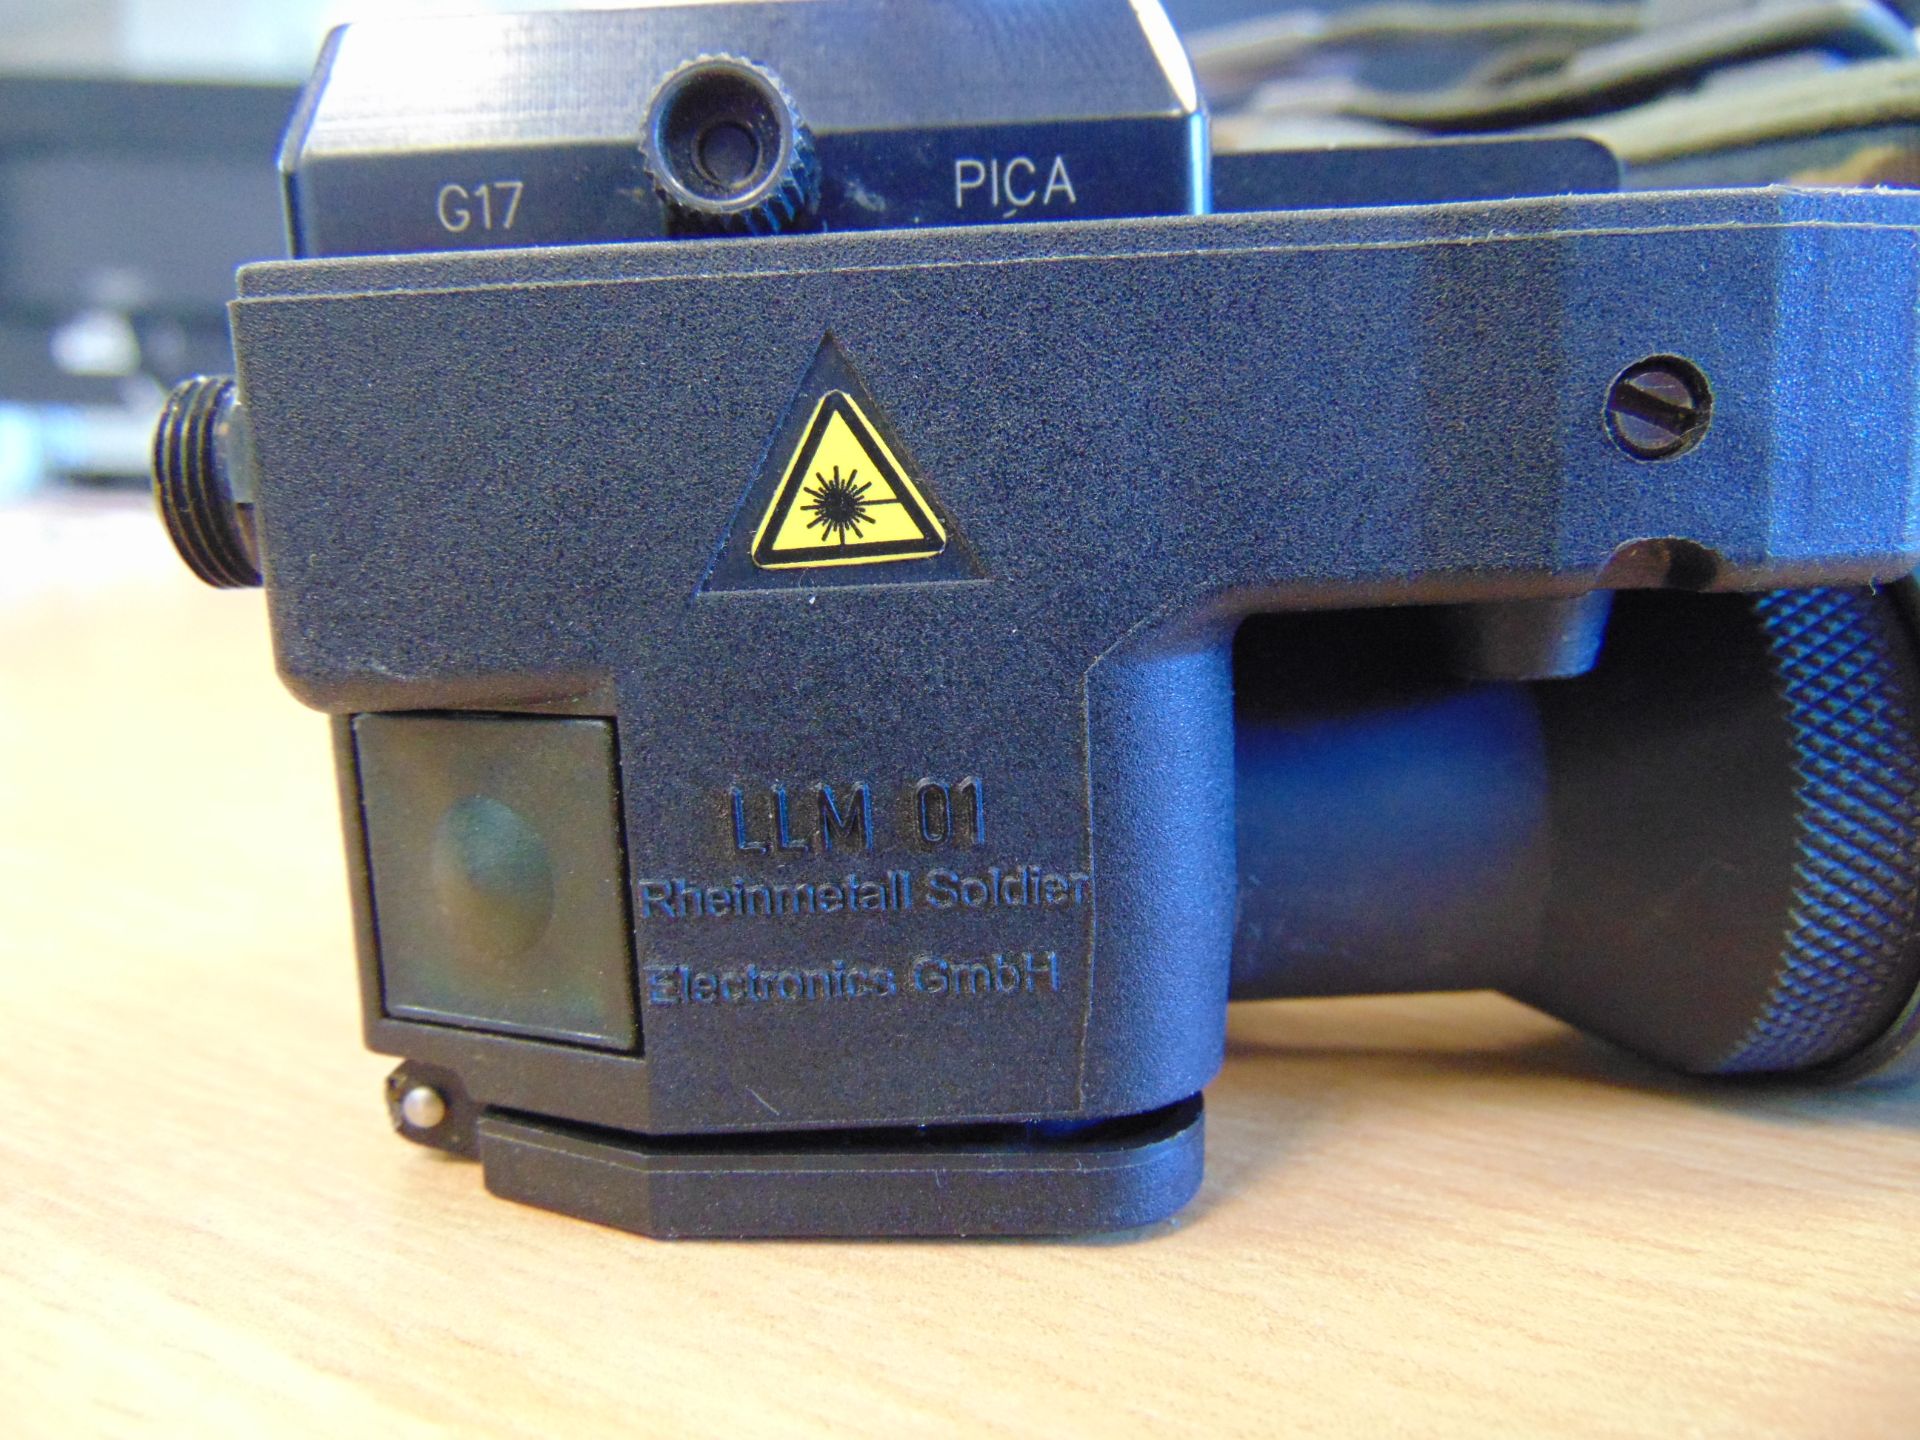 British Army LLMOI Laser Sight module in pouch as shown - Image 5 of 9